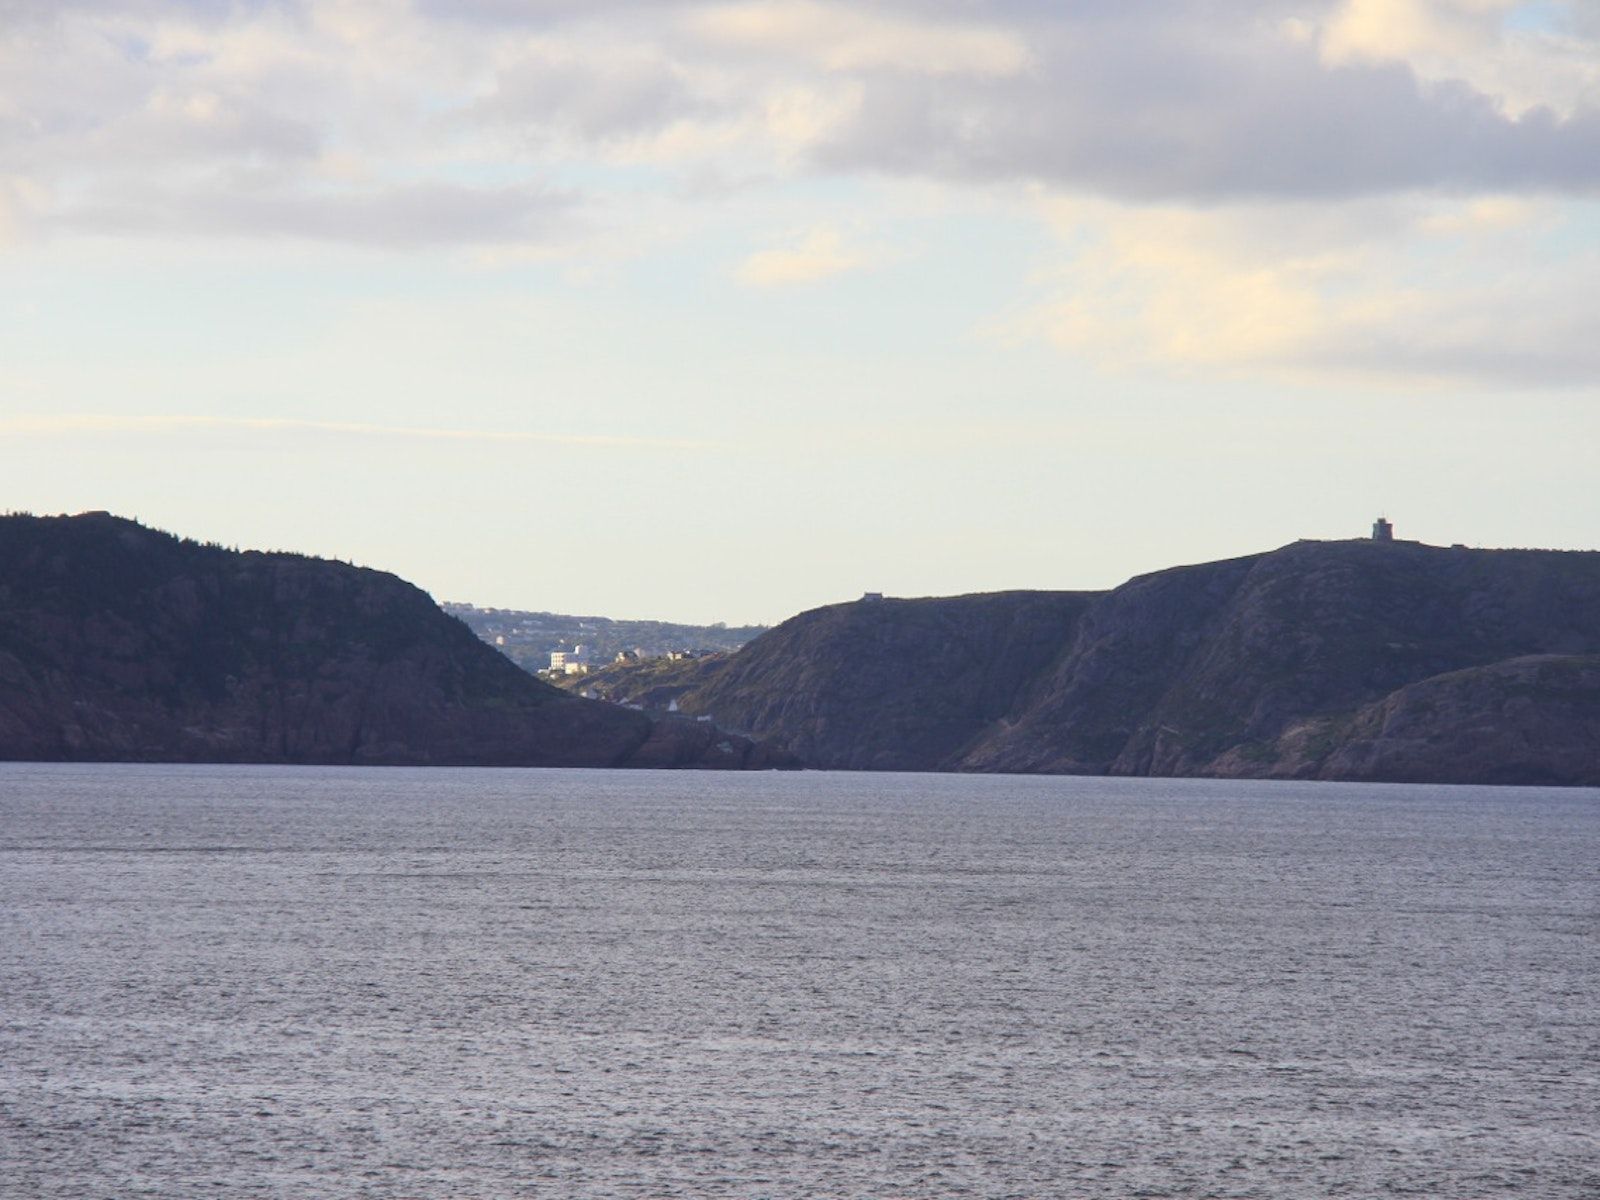 Mouth of the Saint John's Harbour in Newfoundland looking into the harbour from the ocean 